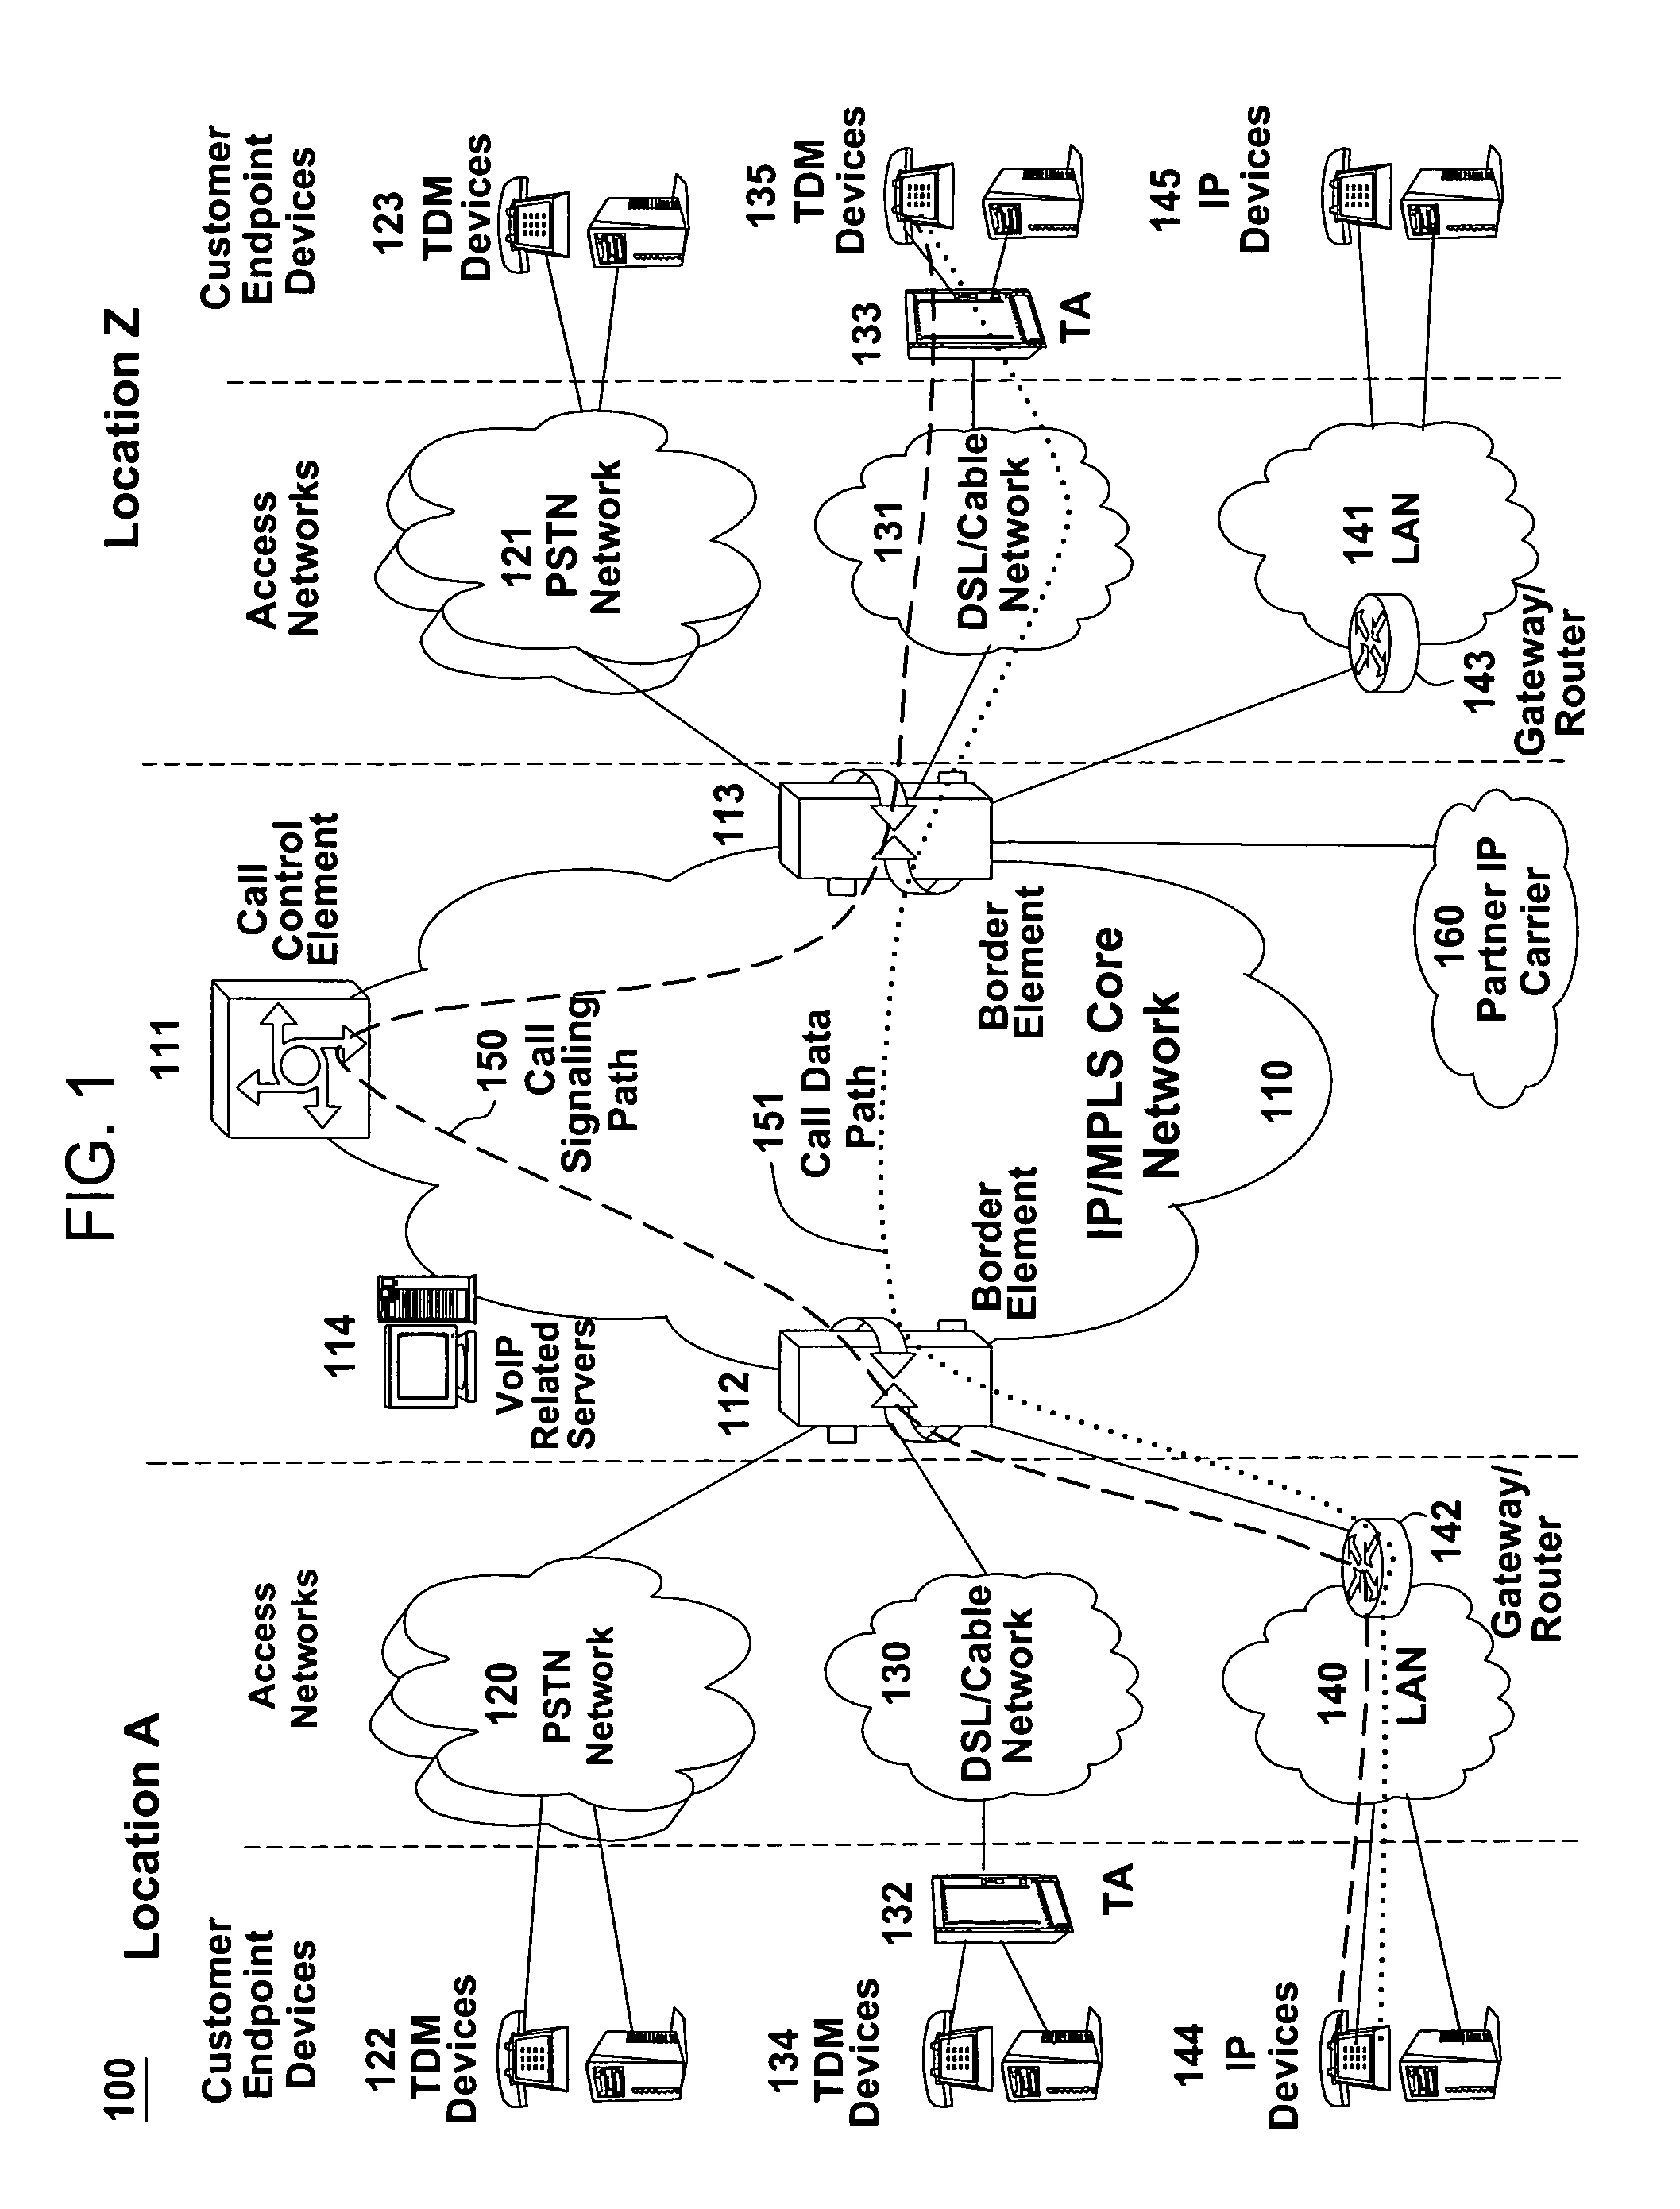 Method and apparatus for providing end-to-end call completion status